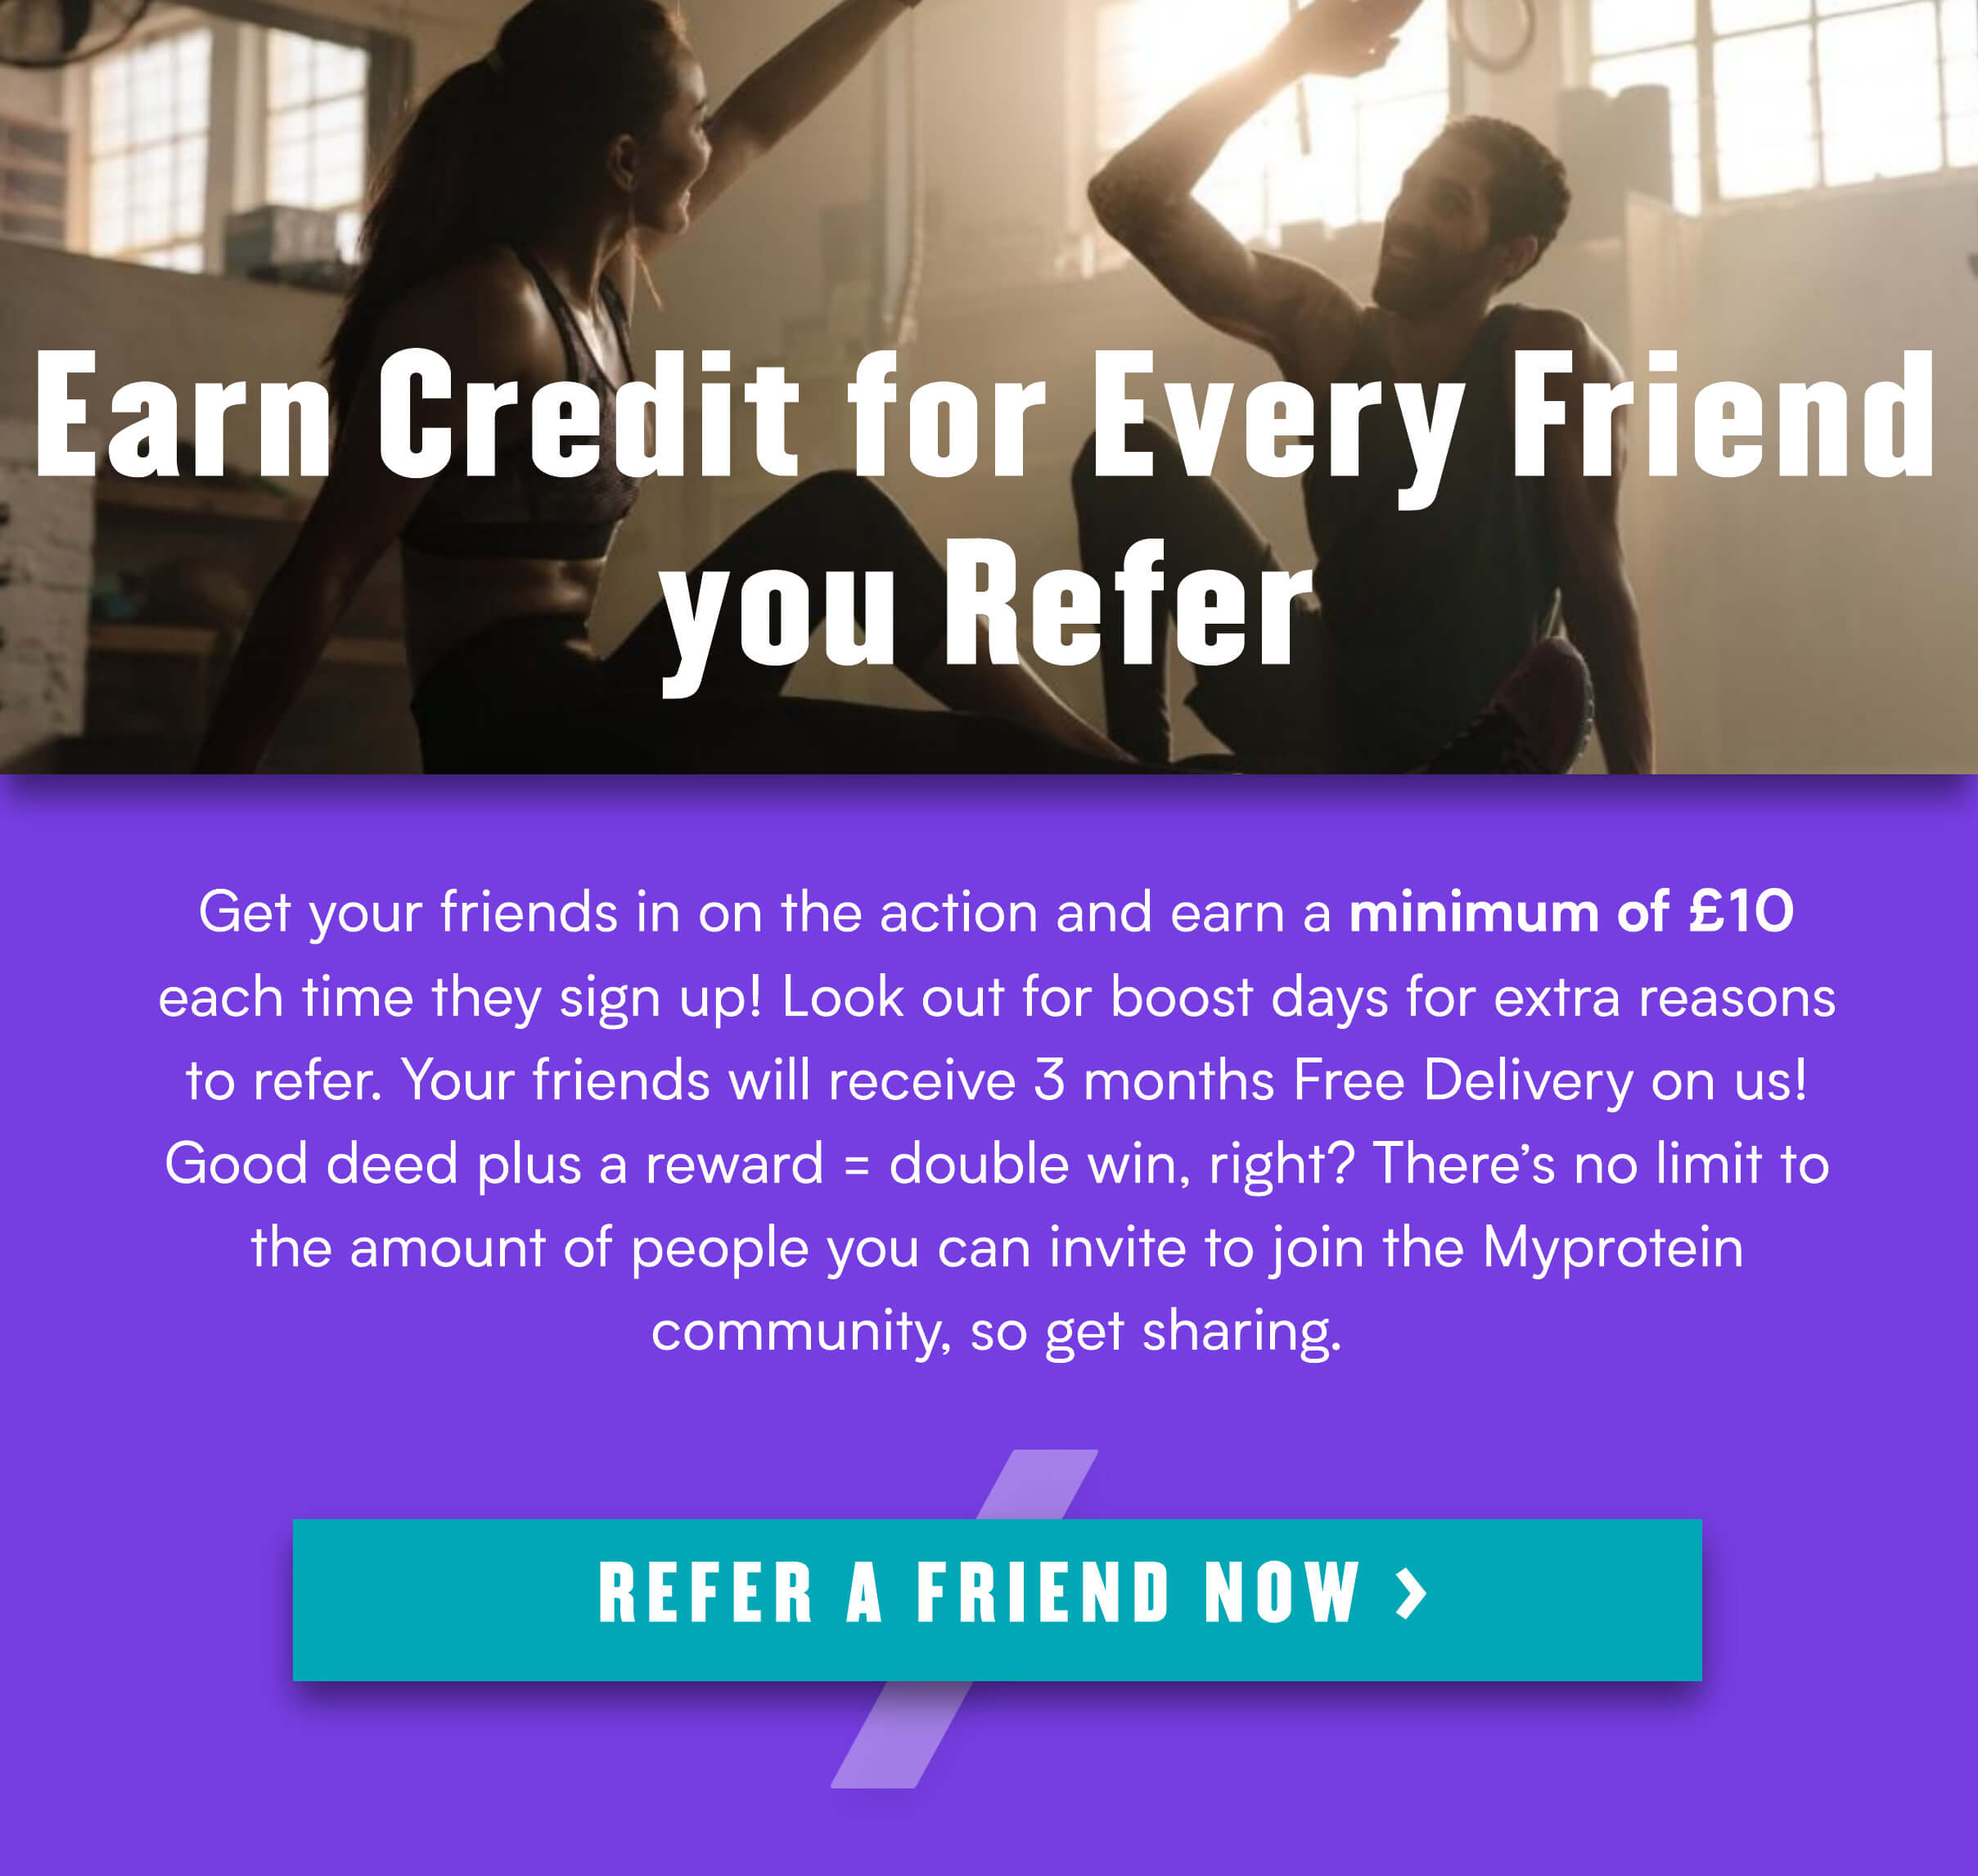  i w e W Earn Credit for Eve ST G A Get your friends in on the action and earn a minimum of 10 each time they sign up! Look out for boost days for extra reasons to refer. Your friends will receive 3 months Free Delivery on us! Good deed plus a reward double win, right? Theres no limit fo the amount of people you can invite to join the Myprotein community, so get sharing. 4 REFER A FRIEND NOW 